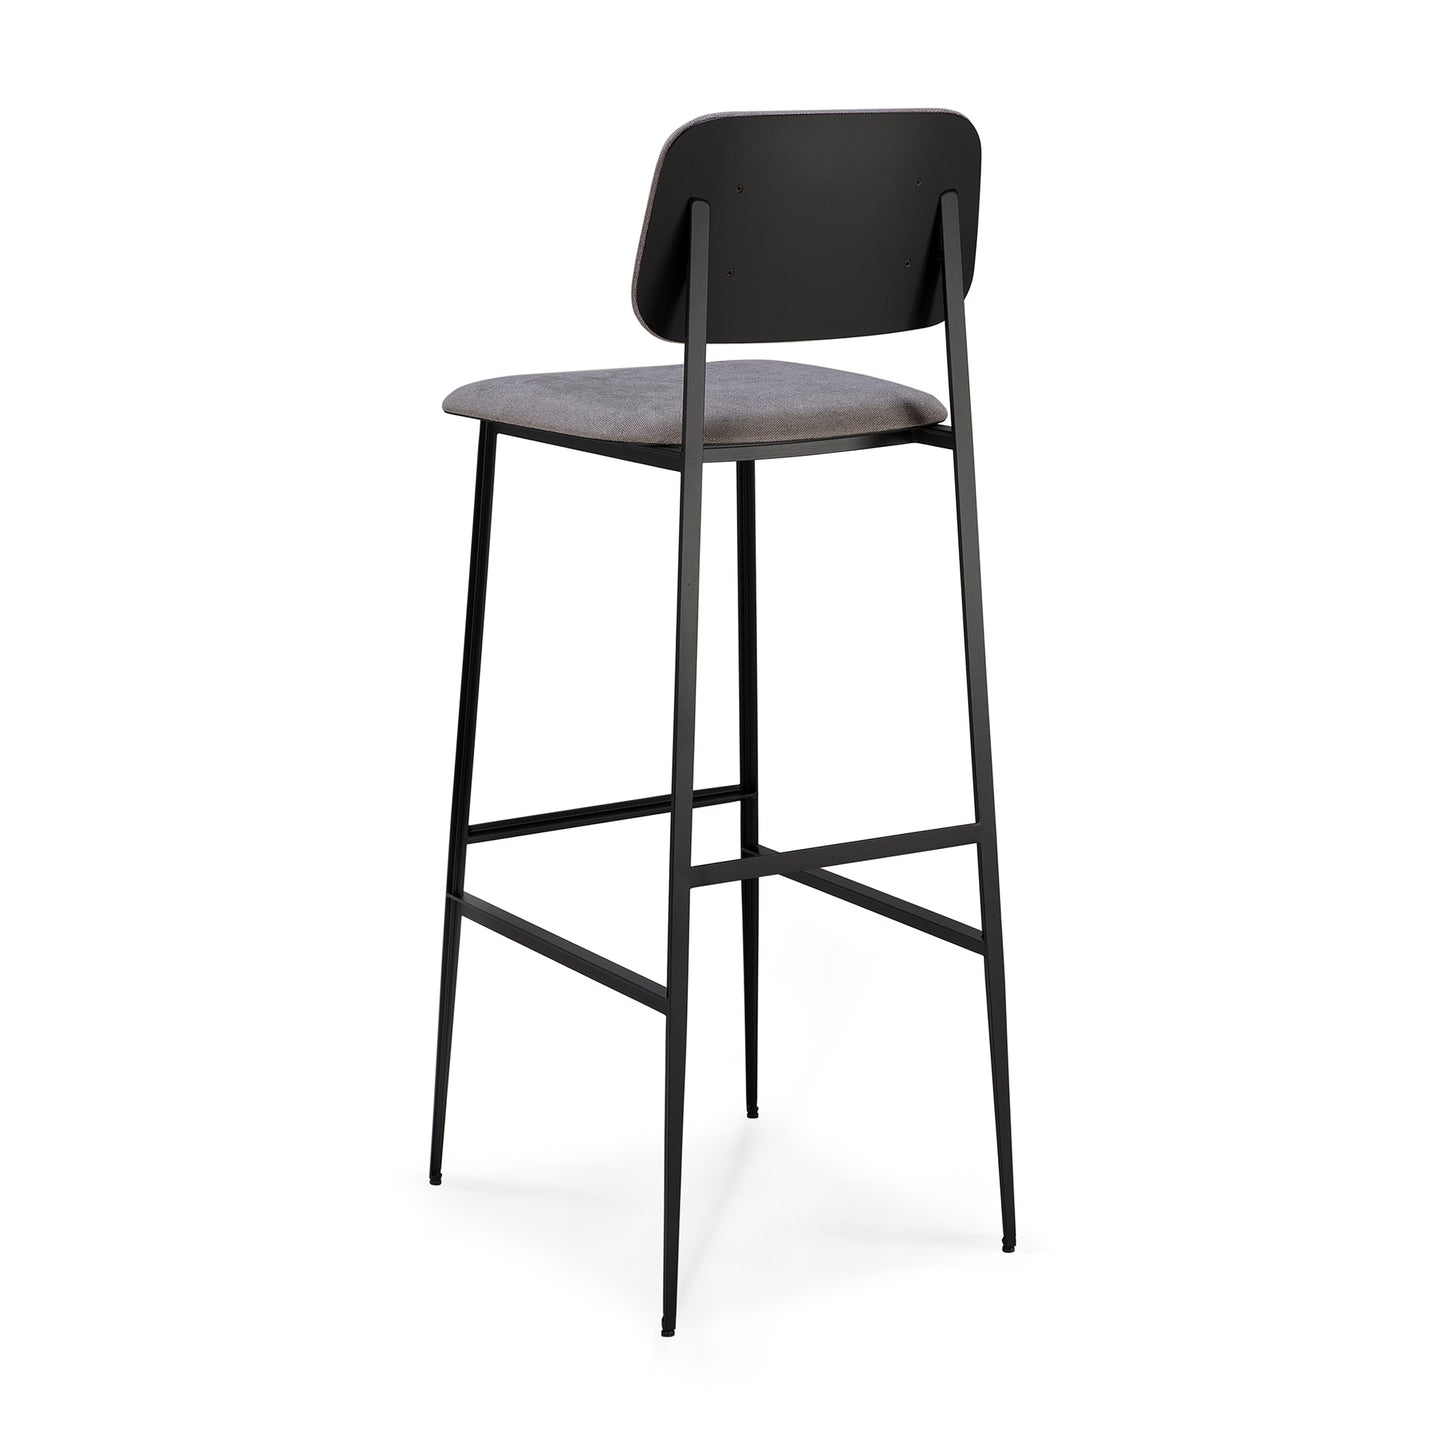 Ethnicraft DC Counter Bar Stool available from Make Your House A Home, Bendigo, Victoria, Australia